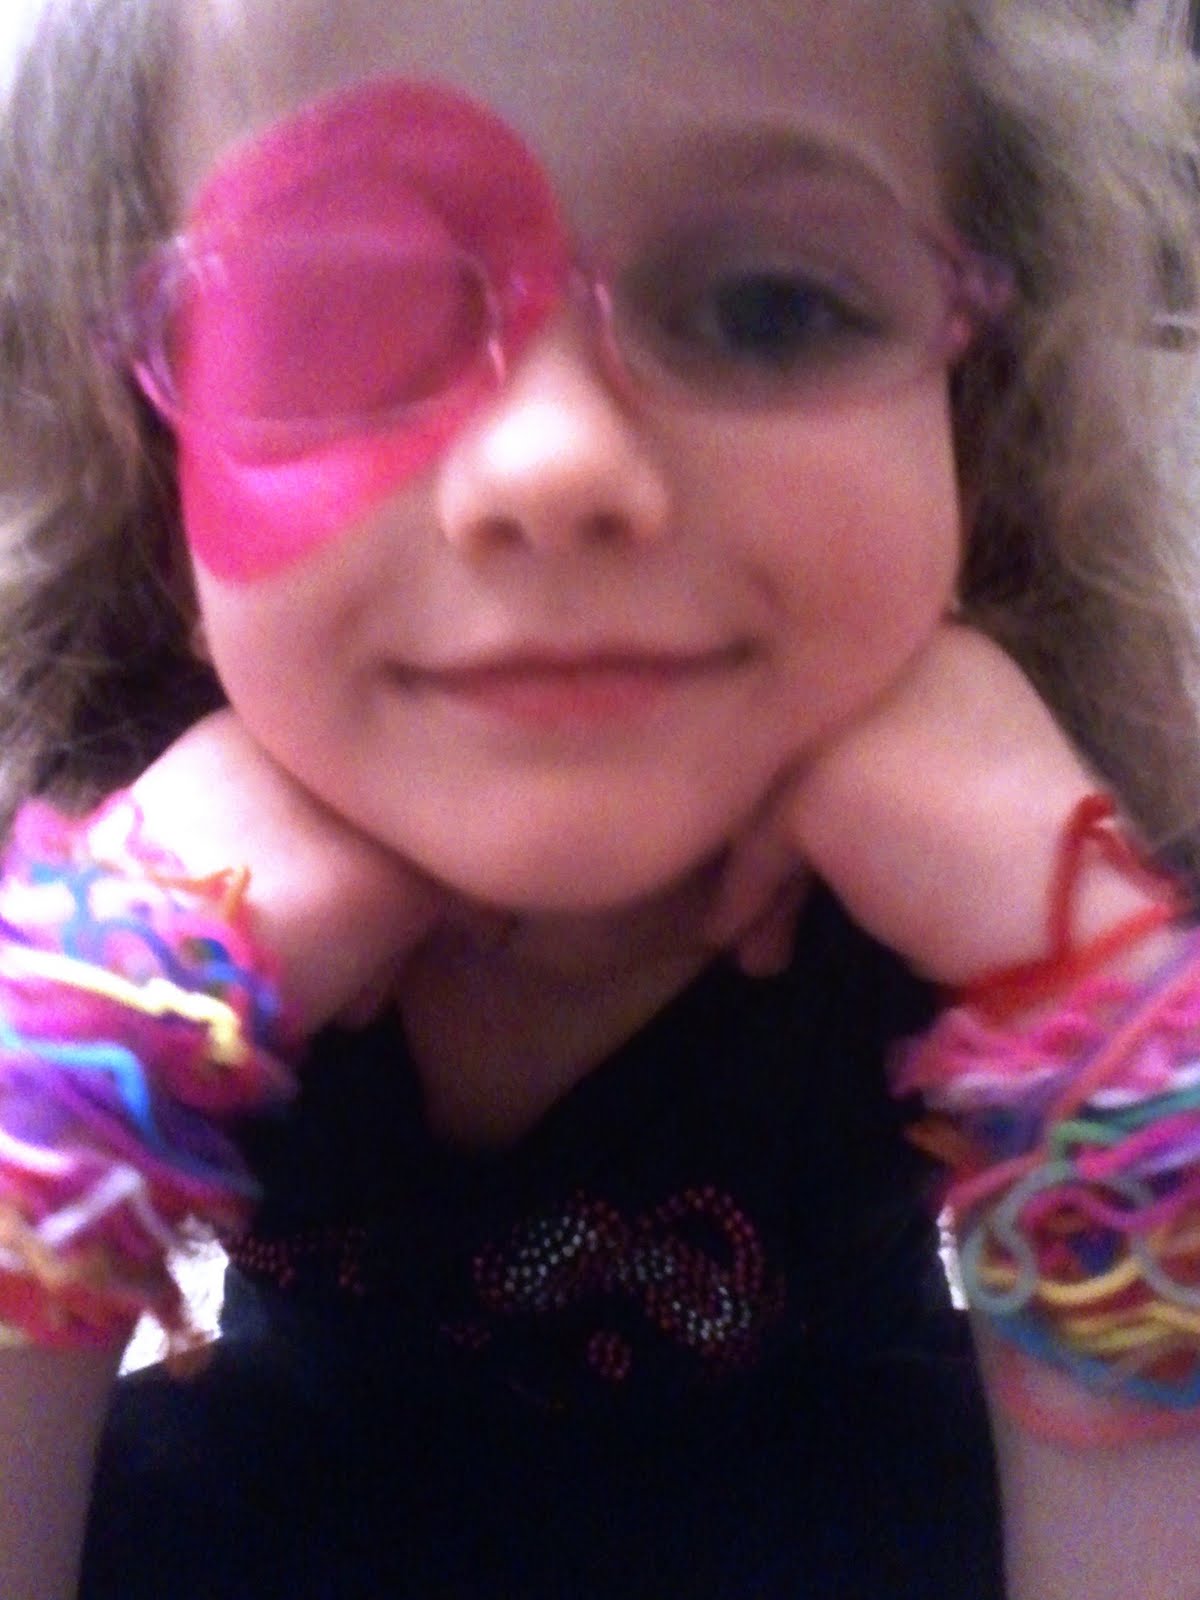 Wearing Eye Patch For Amblyopia